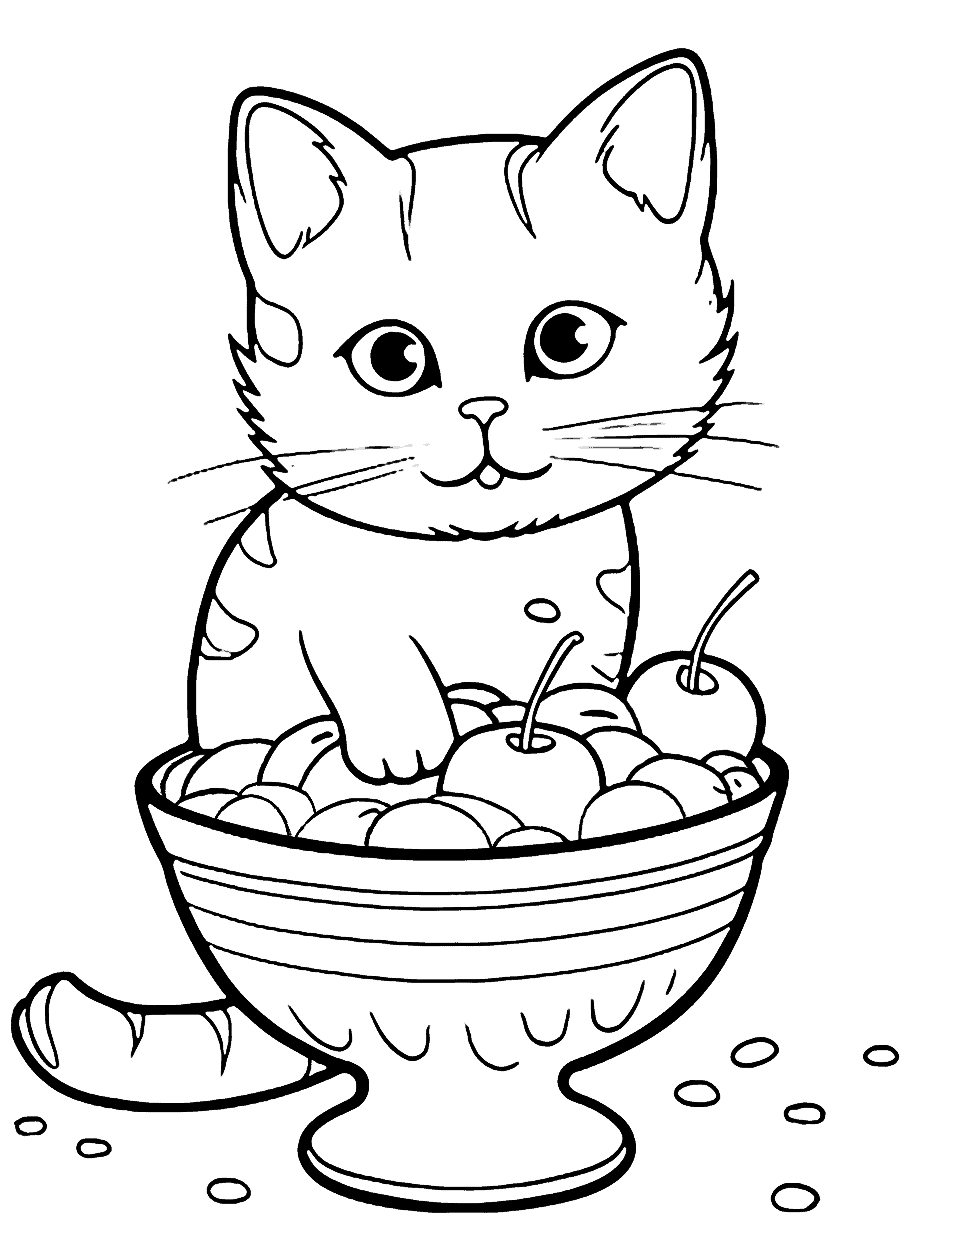 Ice Cream Sundae Cat Coloring Page - A happy cat sitting inside a large ice cream sundae, complete with a cherry on top.